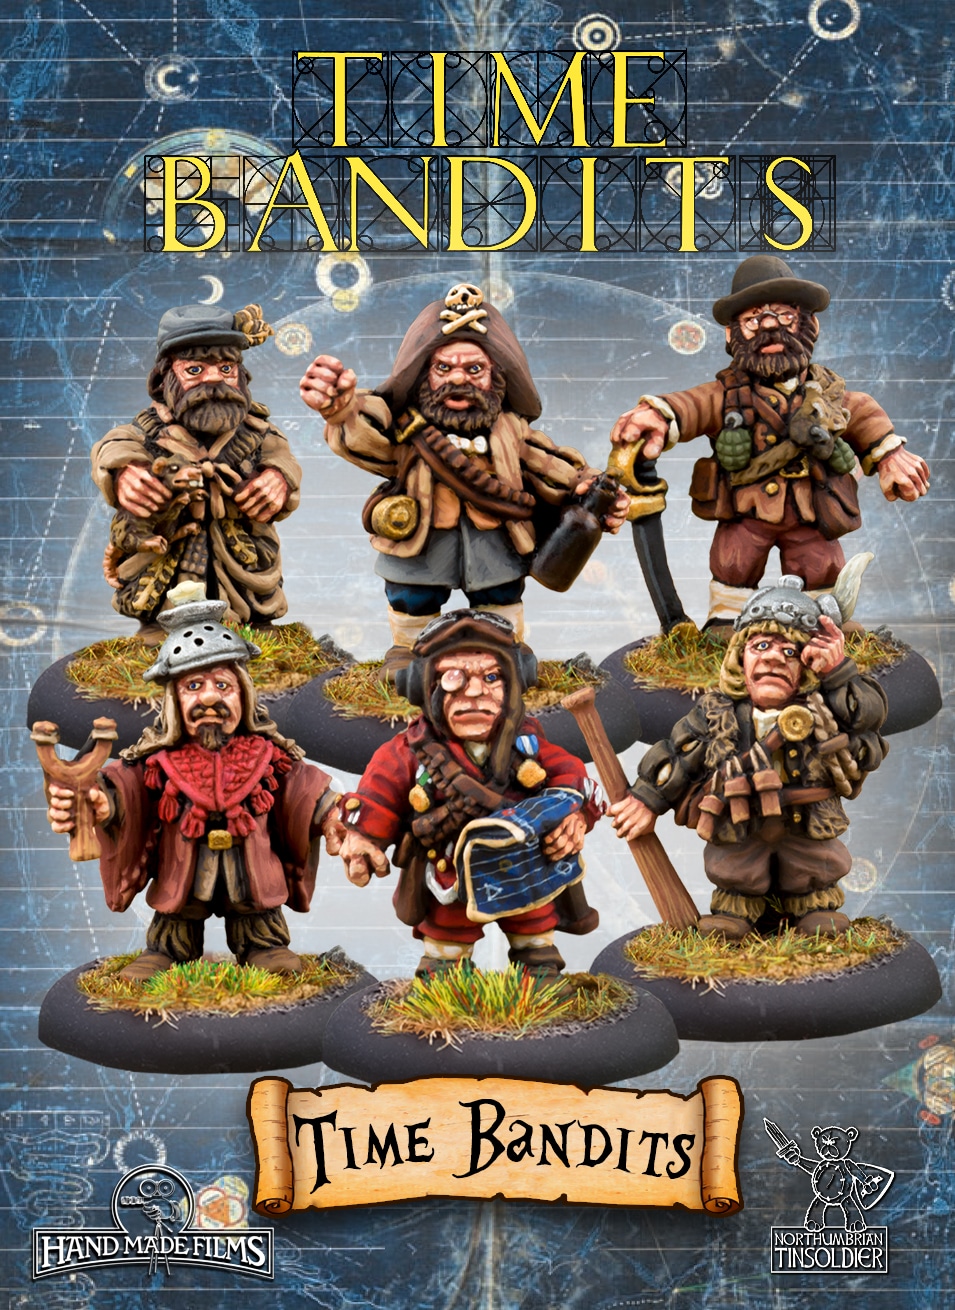 https://www.northumbriantinsoldier.com/wp-content/uploads/2020/05/Time-Bandits-card.jpg